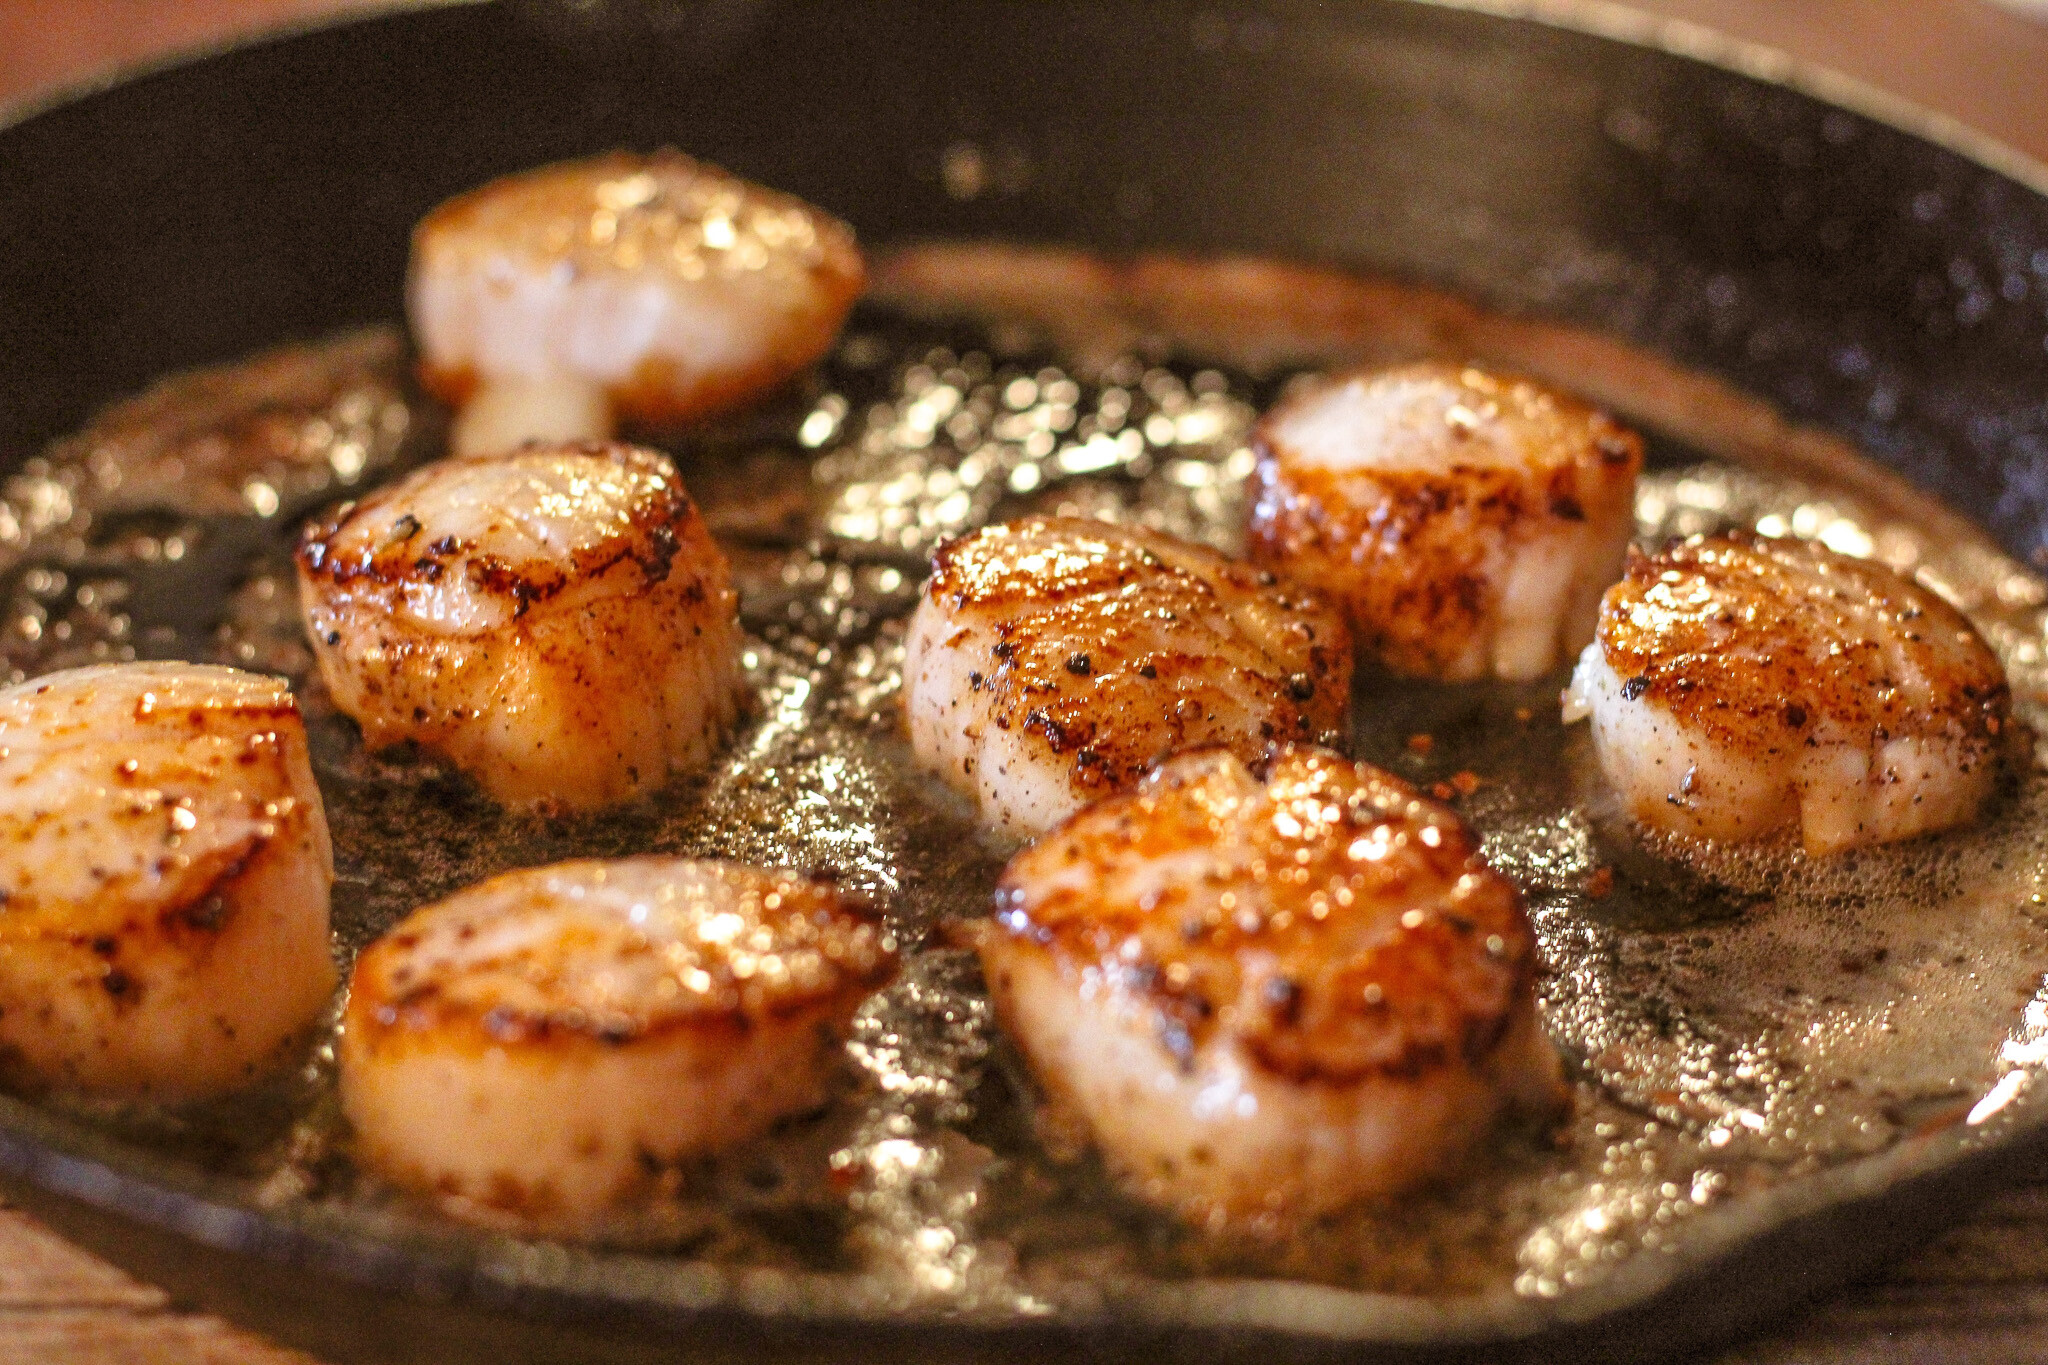 Scallops being seared in a pan with butter.